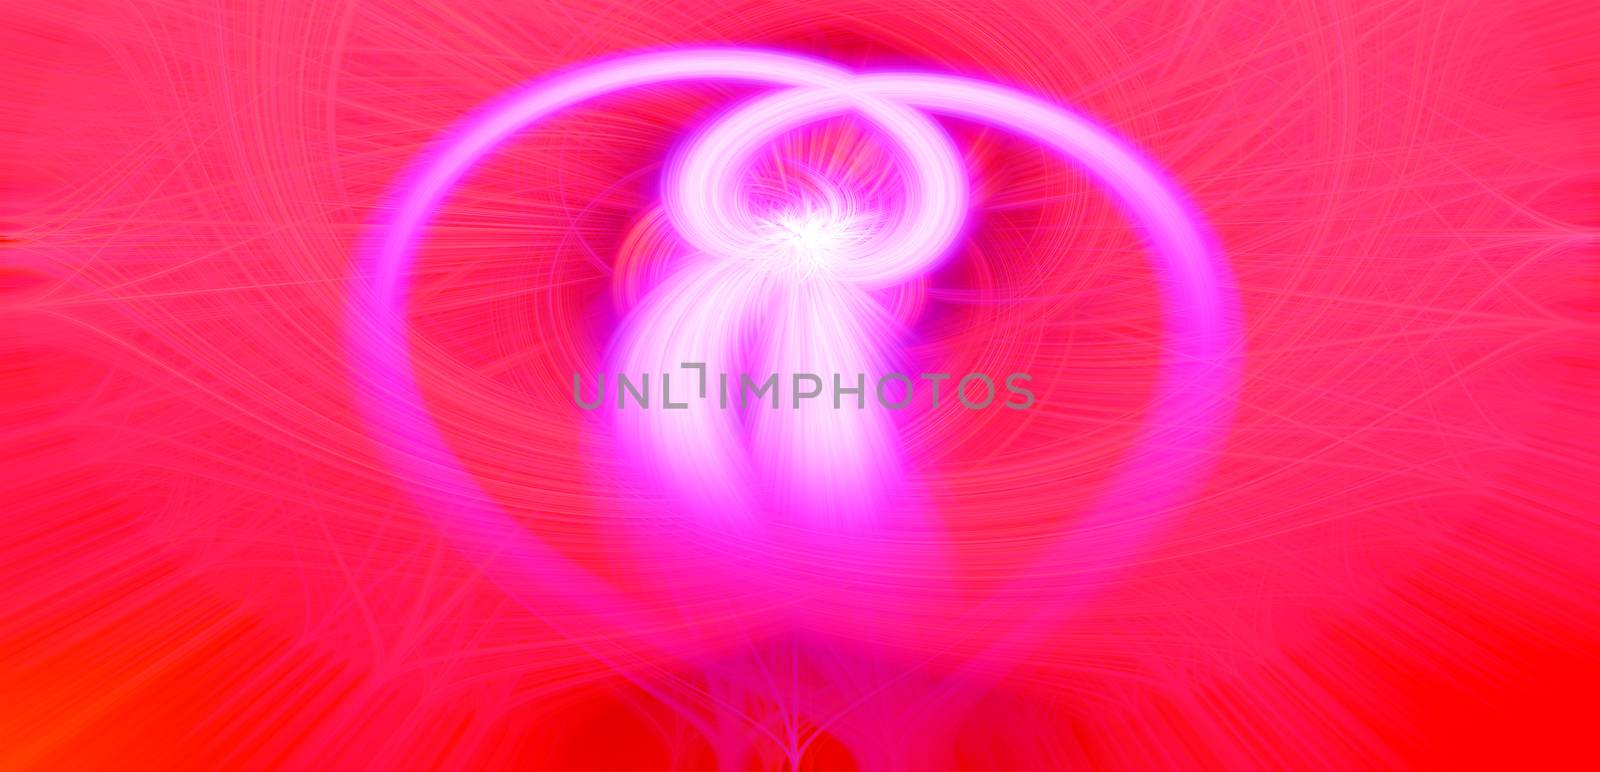 Beautiful abstract intertwined glowing 3d fibers forming a shape of sparkle, flame, flower, interlinked hearts. Bright red and pink colors. St. Valentines day concept. Banner size. Illustration by DamantisZ